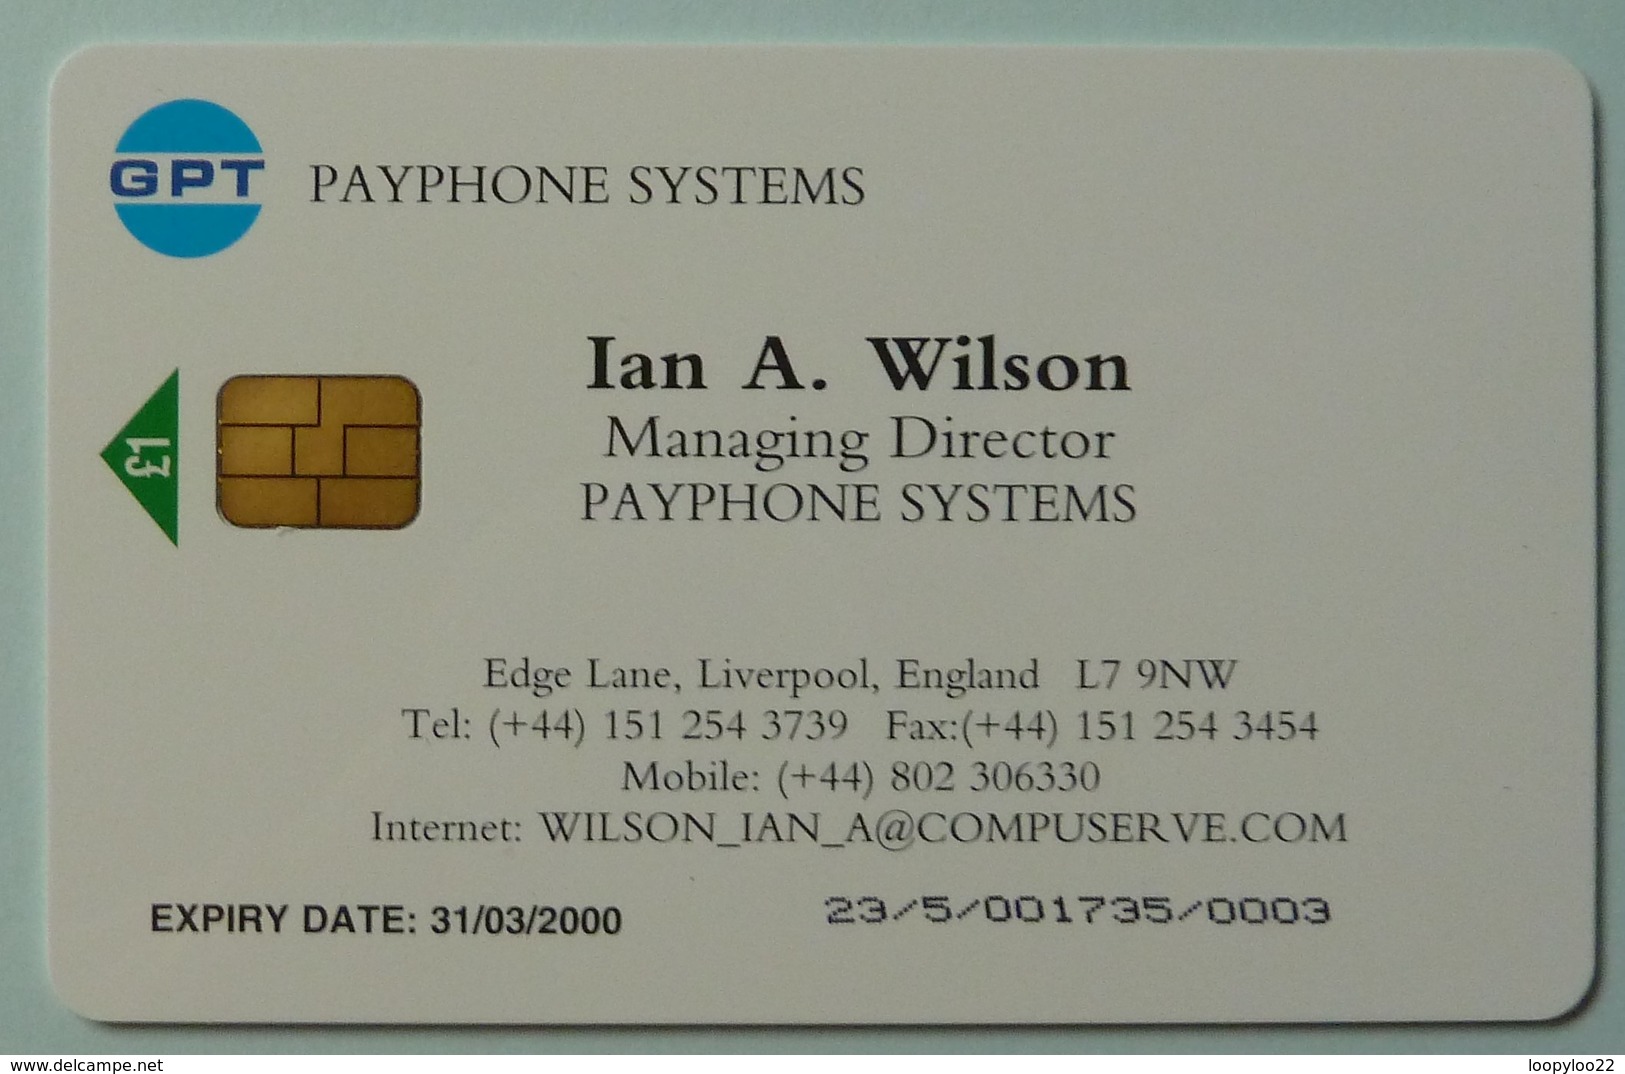 UK - Great Britain - GPT - Smartcard - PRO418 - Ian A Wilson - 23/5/001735/... - 31/03/2000 - Low Control Number - R - Other & Unclassified